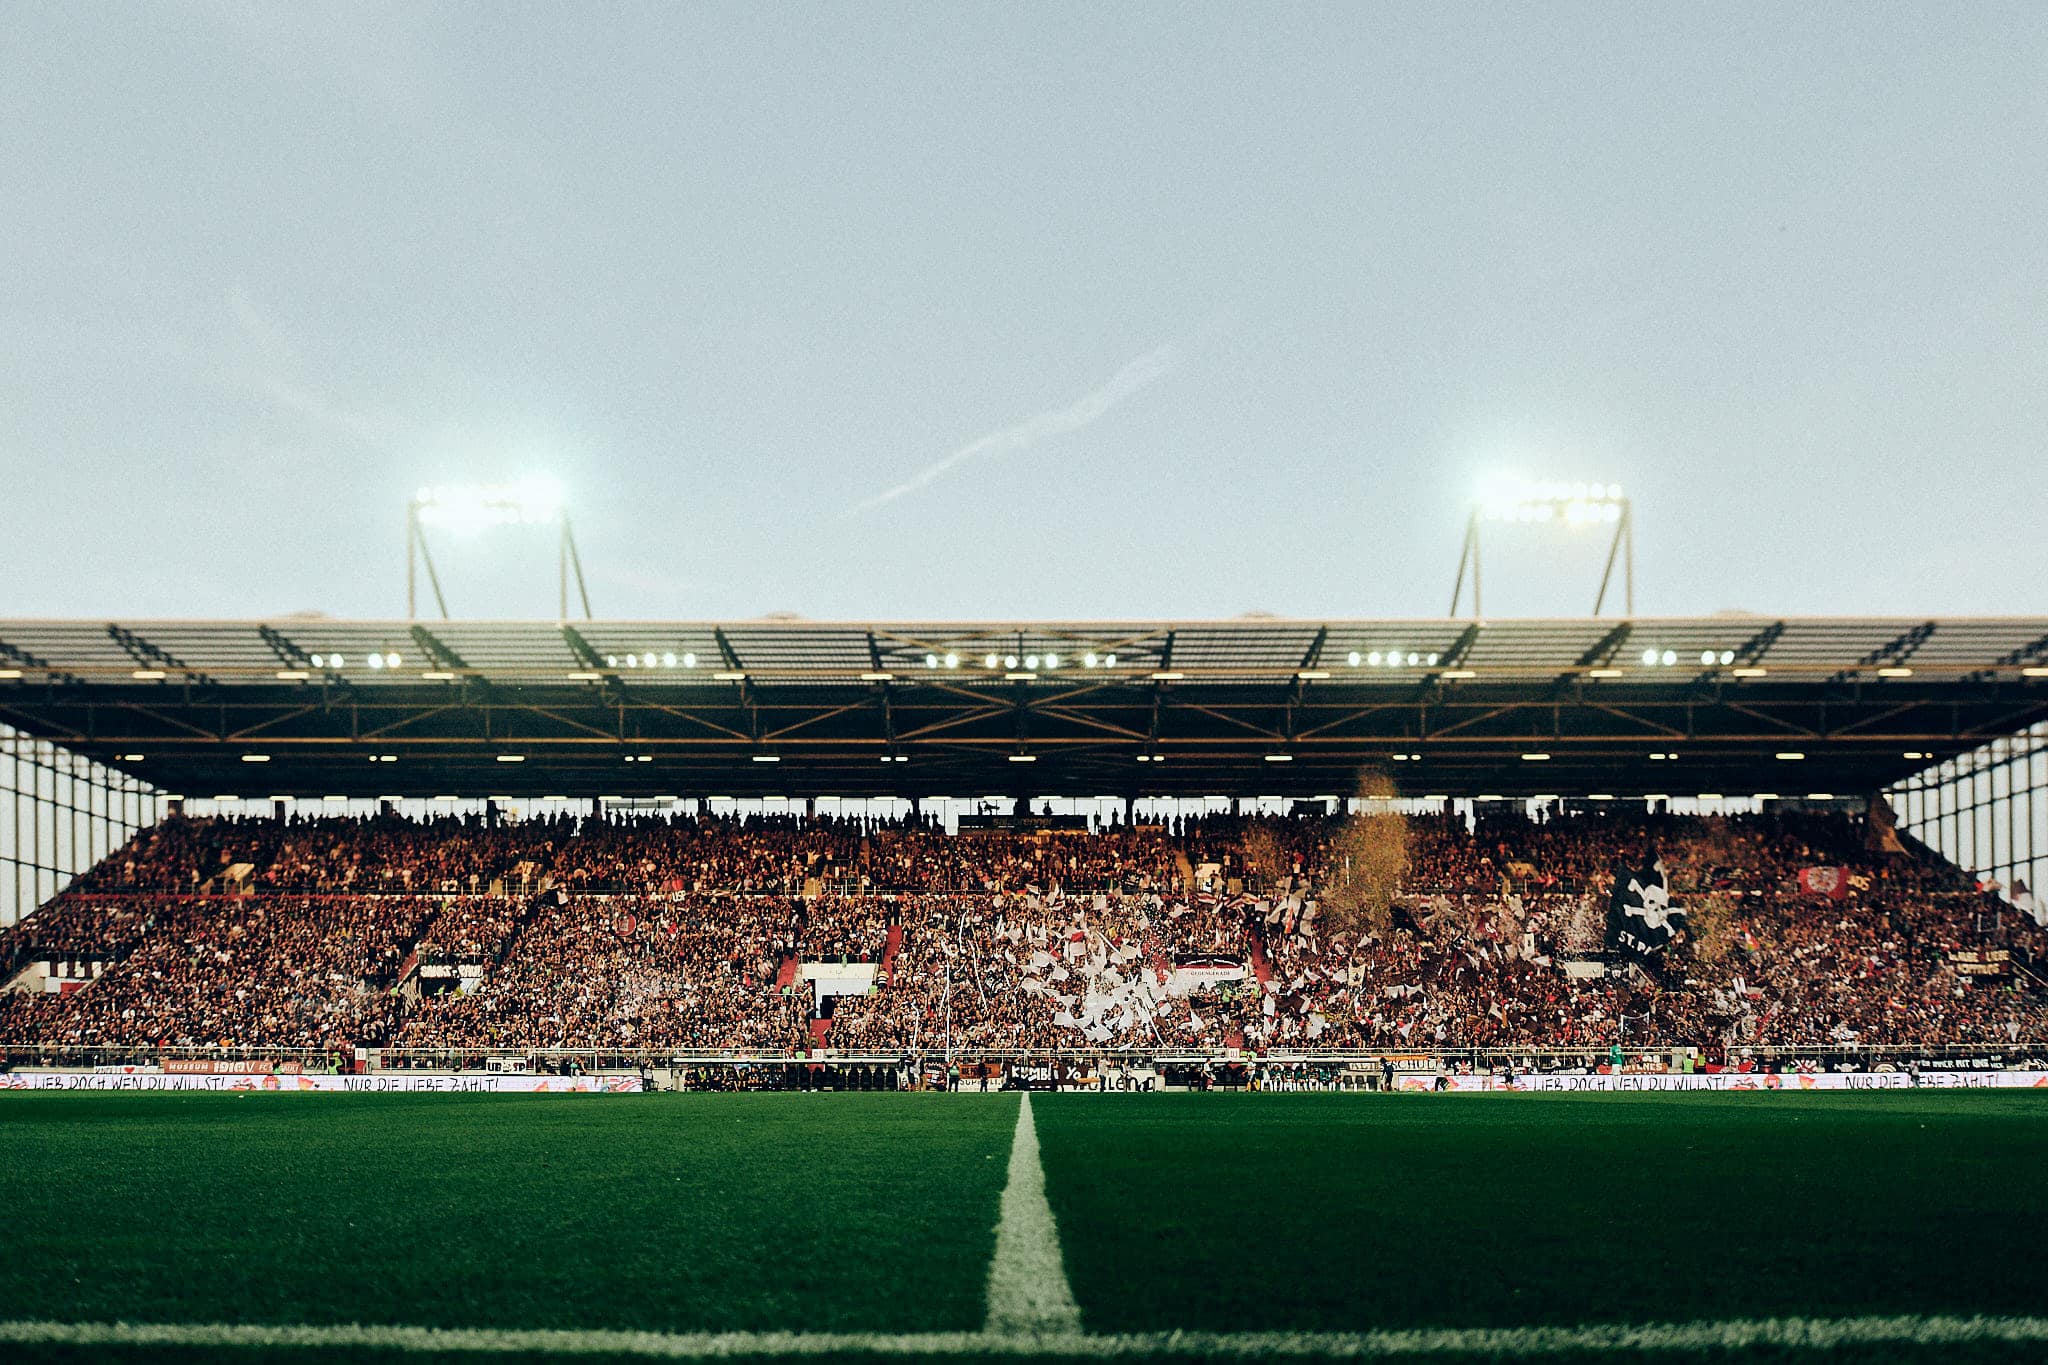 Reforms now! – The position paper of the FCSP and its supporter’s scene